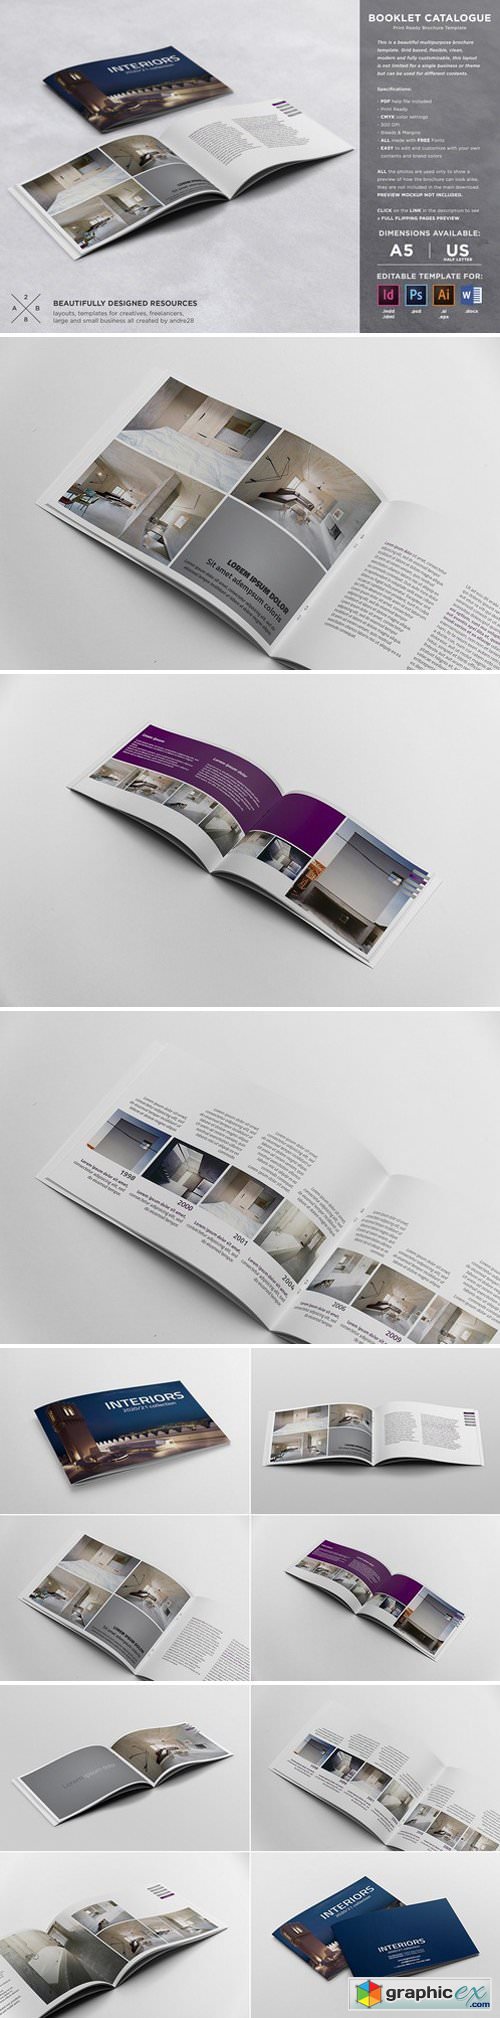 Booklet Catalogue Template